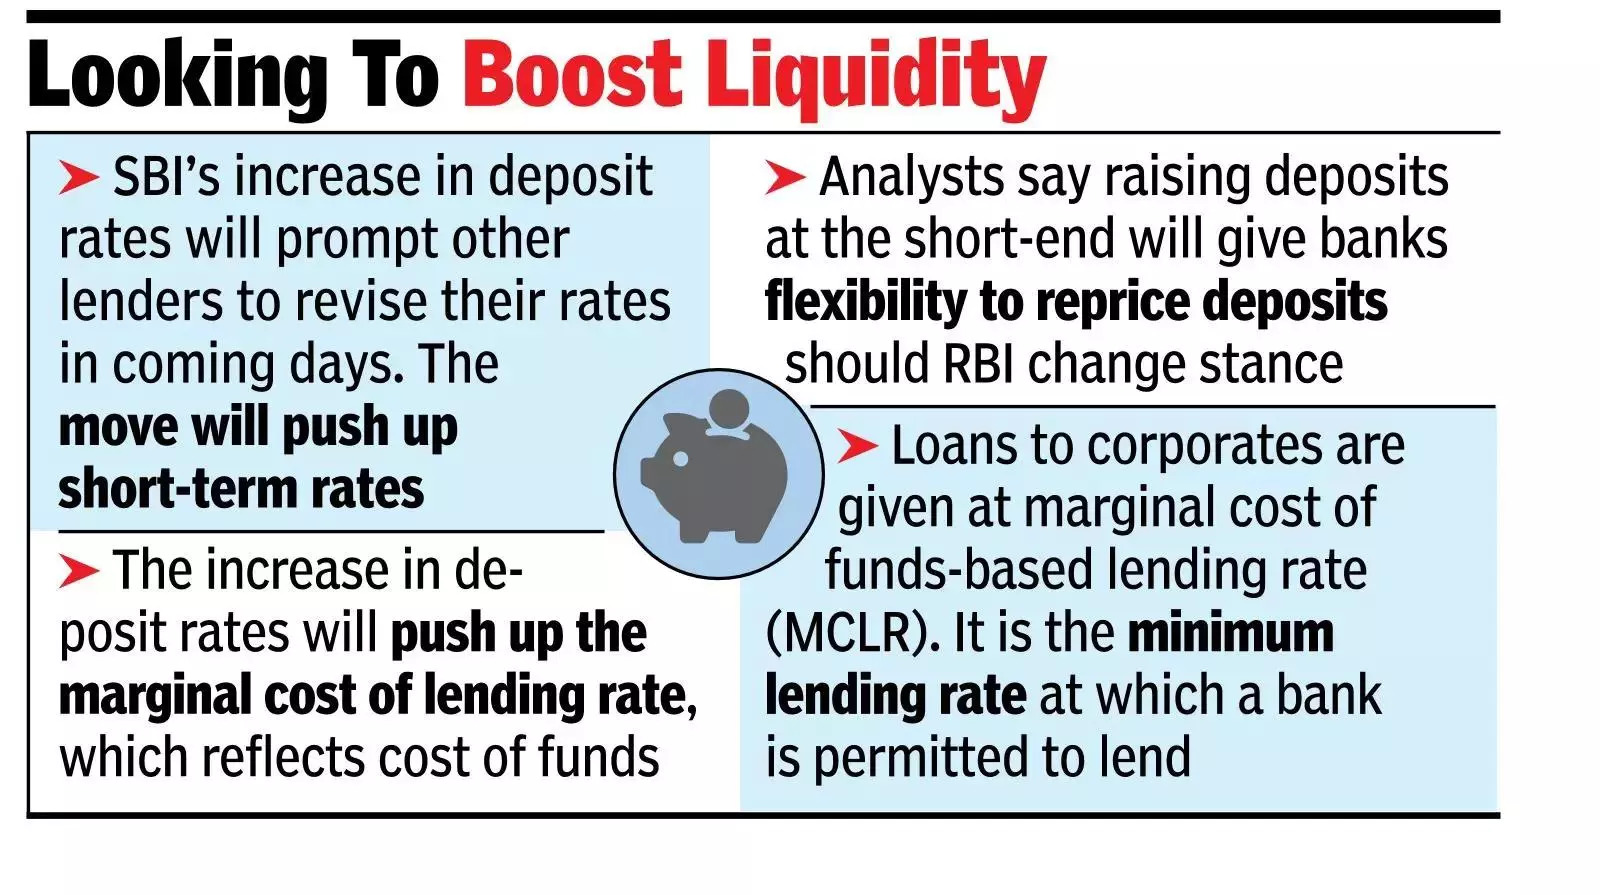 SBI hikes short-term FD rates, may push other PSBs to relook.